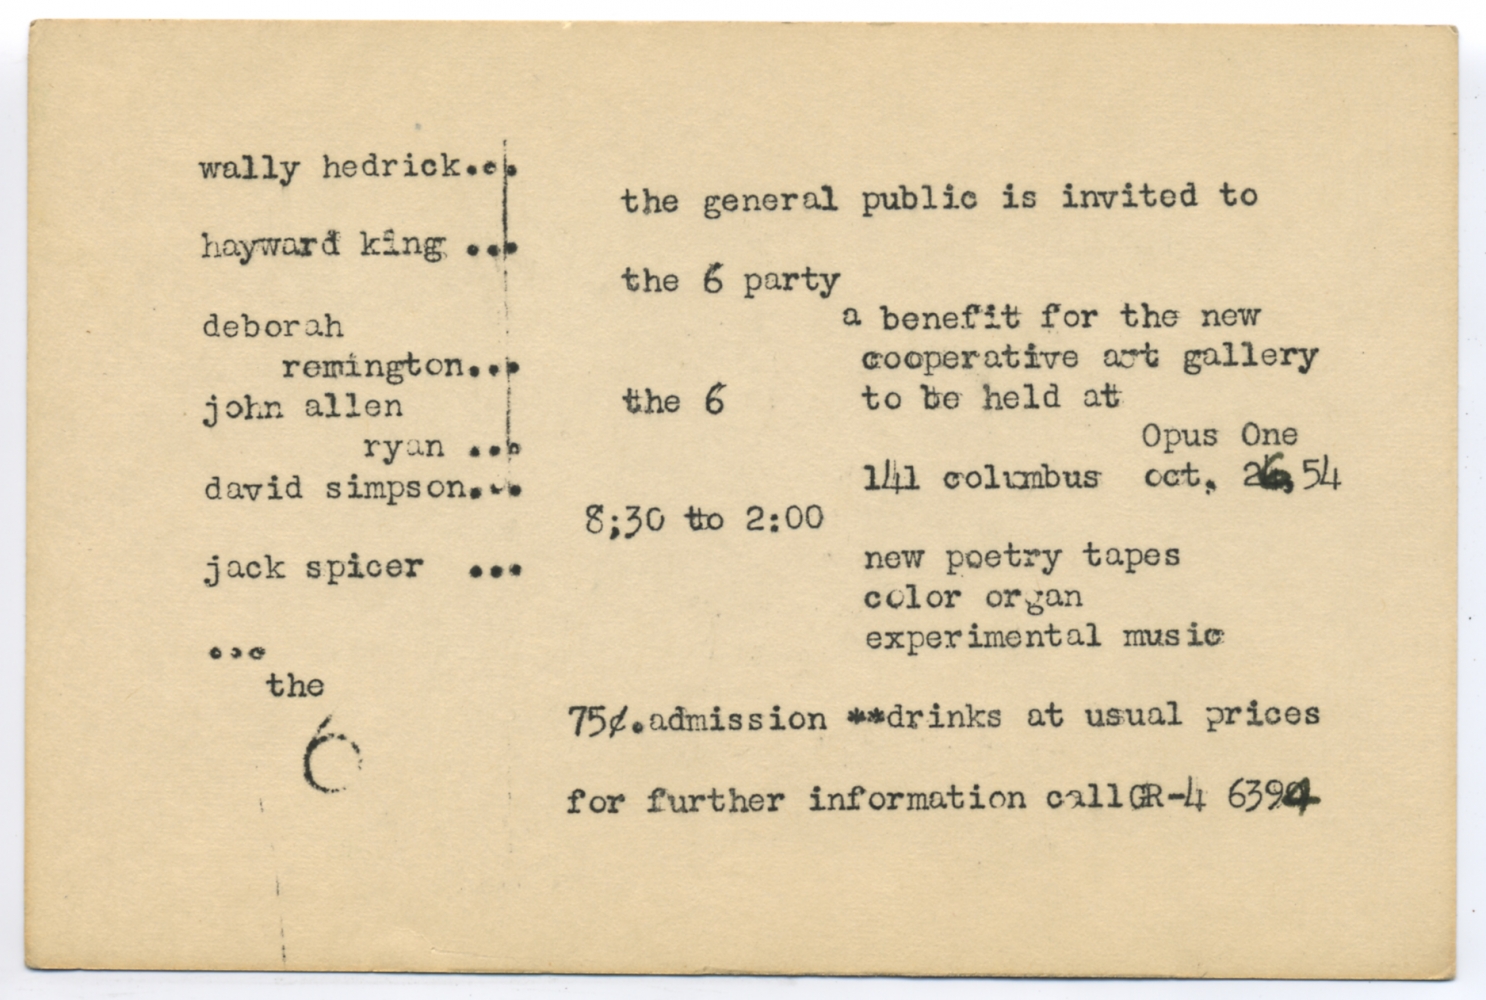 Invitation to the 6 Party, to benefit the opening of the 6 Gallery, 1954., Image courtesy the Deborah Remington Charitable Trust for the Visual Arts.